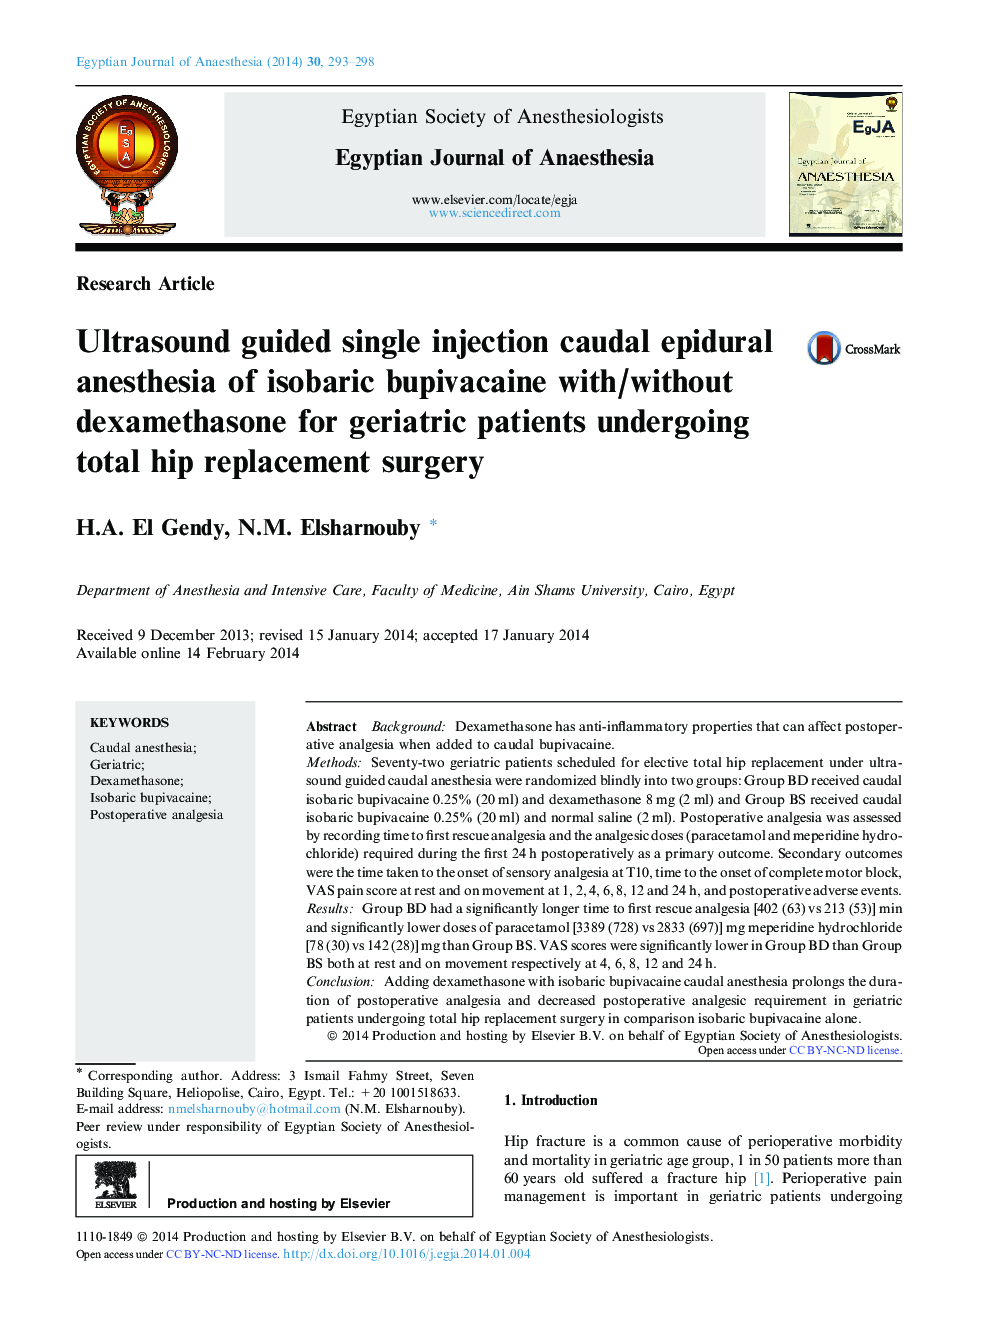 Ultrasound guided single injection caudal epidural anesthesia of isobaric bupivacaine with/without dexamethasone for geriatric patients undergoing total hip replacement surgery 